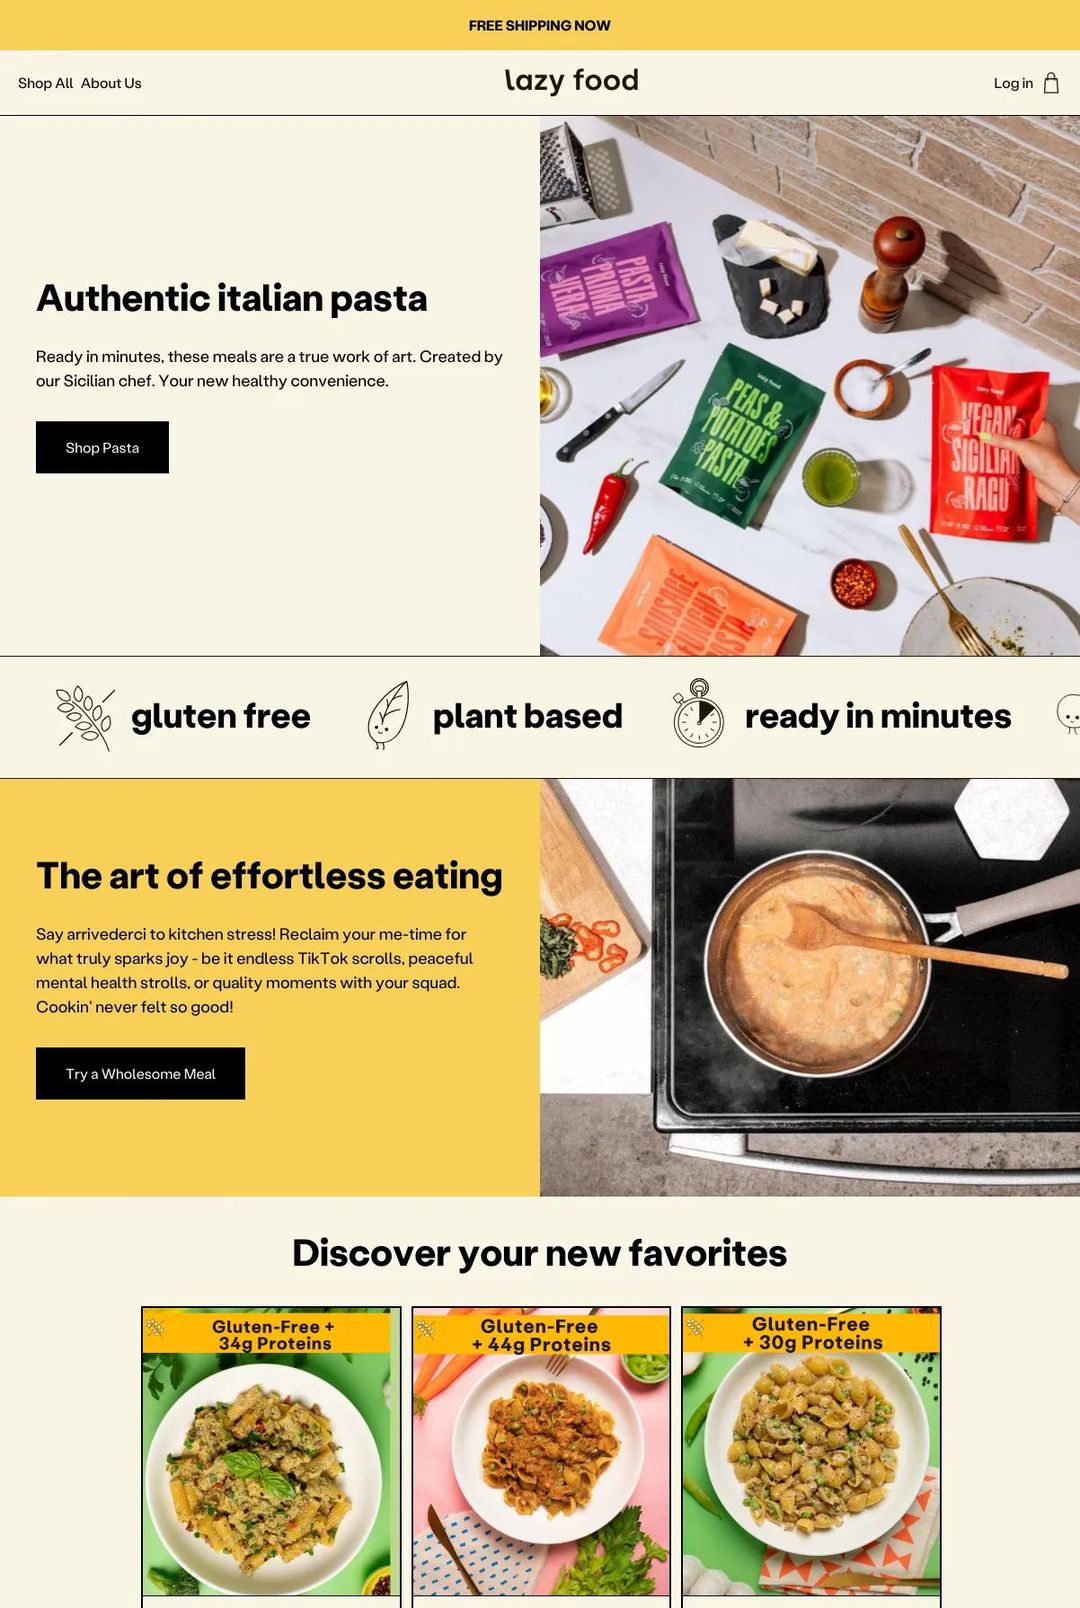 Screenshot 1 of Lazy Food Co. (Example Shopify Food and Beverage Website)